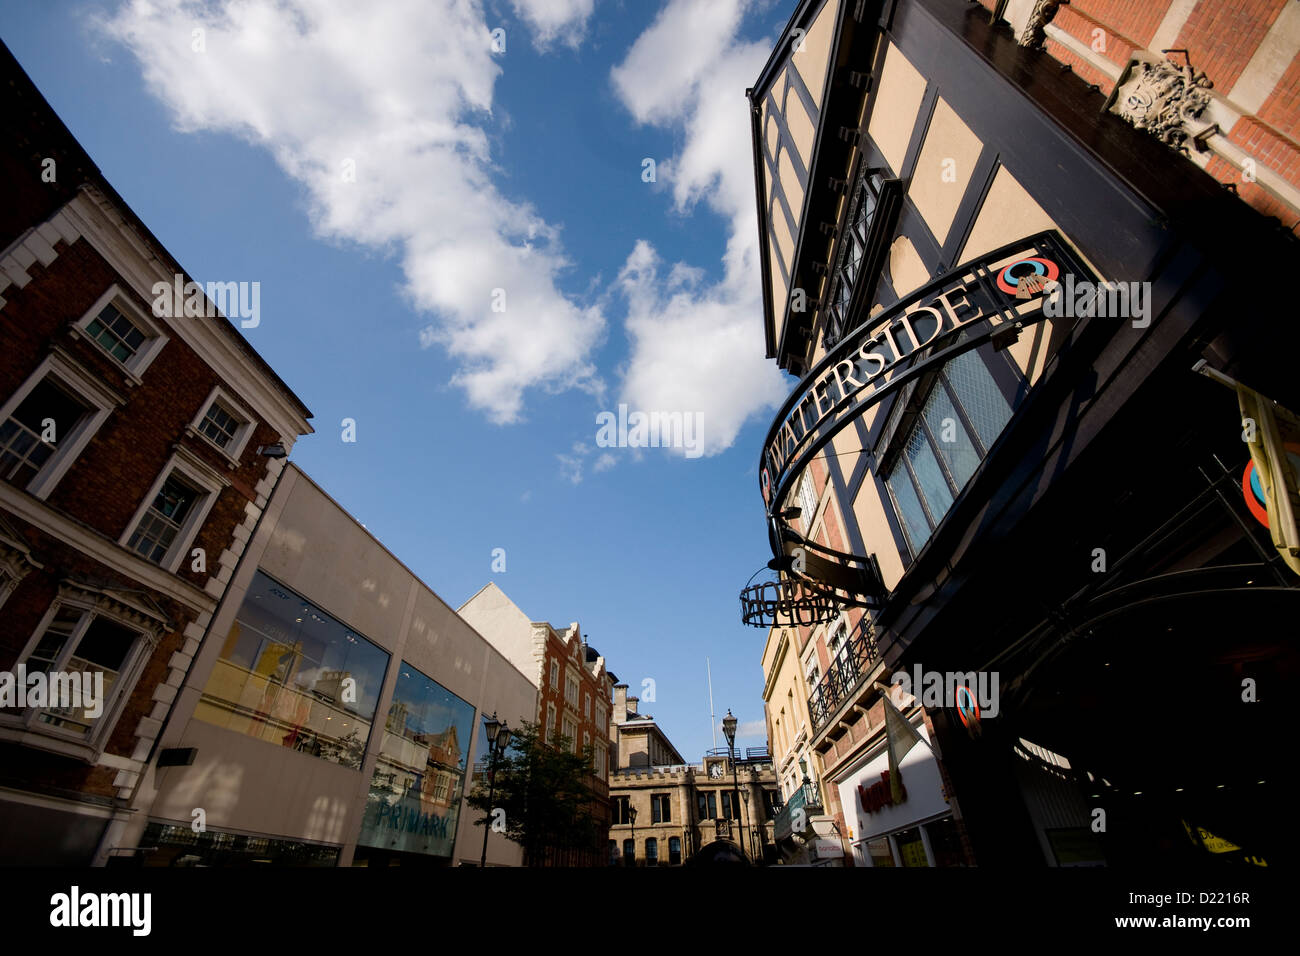 Waterside Shopping Centre, Lincoln, Lincolnshire, UK Stock Photo